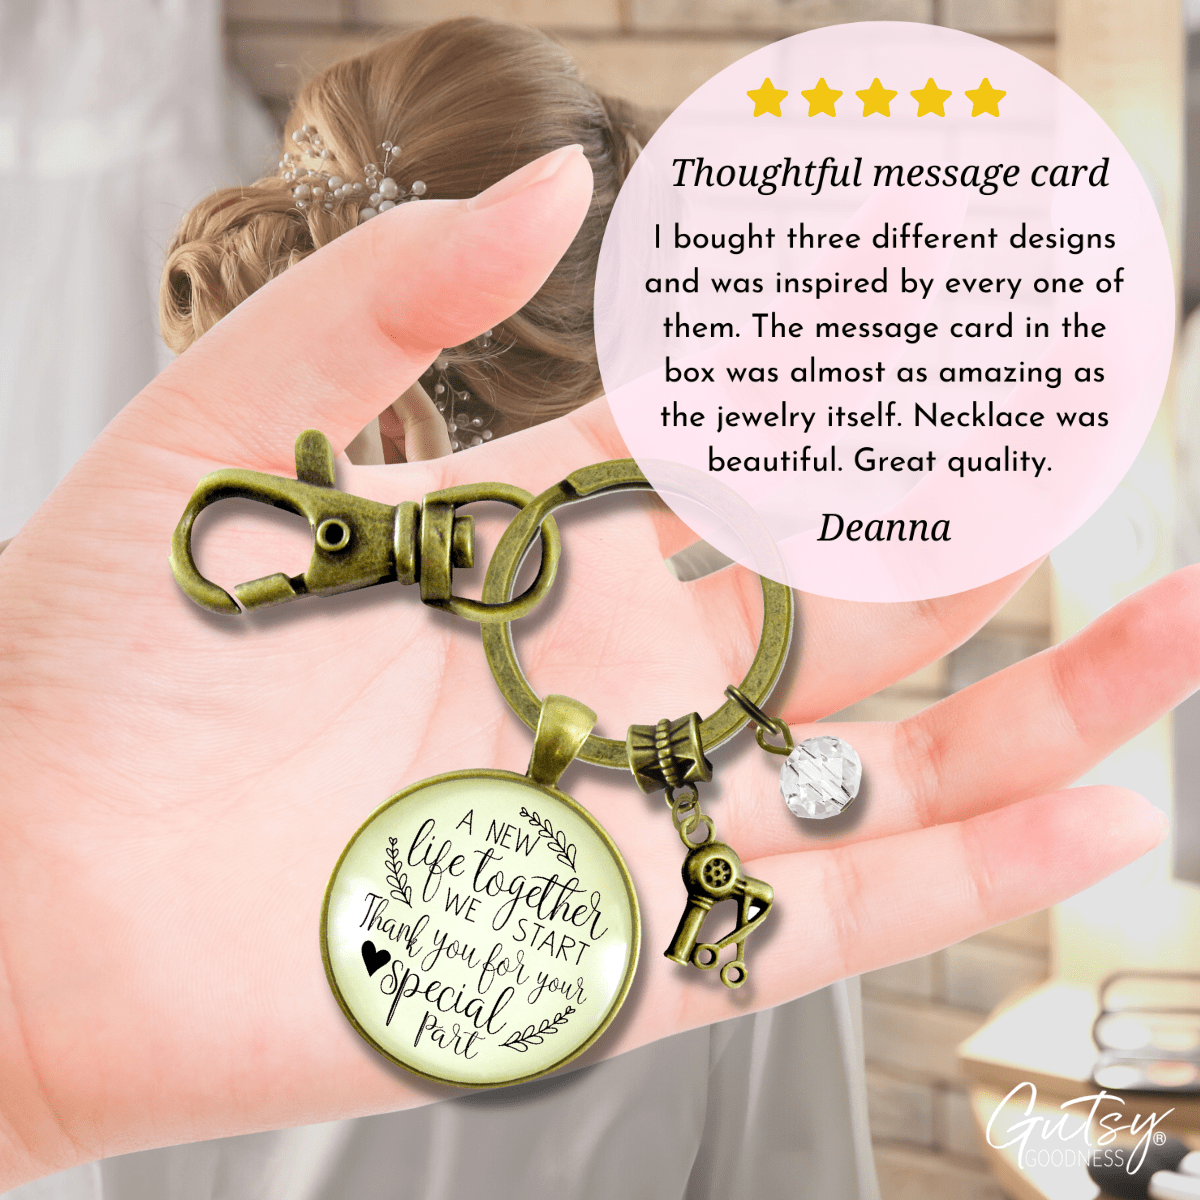 Hairdresser Gift Keychain A New Life We Start Rustic For Stylist Thank You - Gutsy Goodness Handmade Jewelry;Hairdresser Gift Keychain A New Life We Start Rustic For Stylist Thank You - Gutsy Goodness Handmade Jewelry Gifts